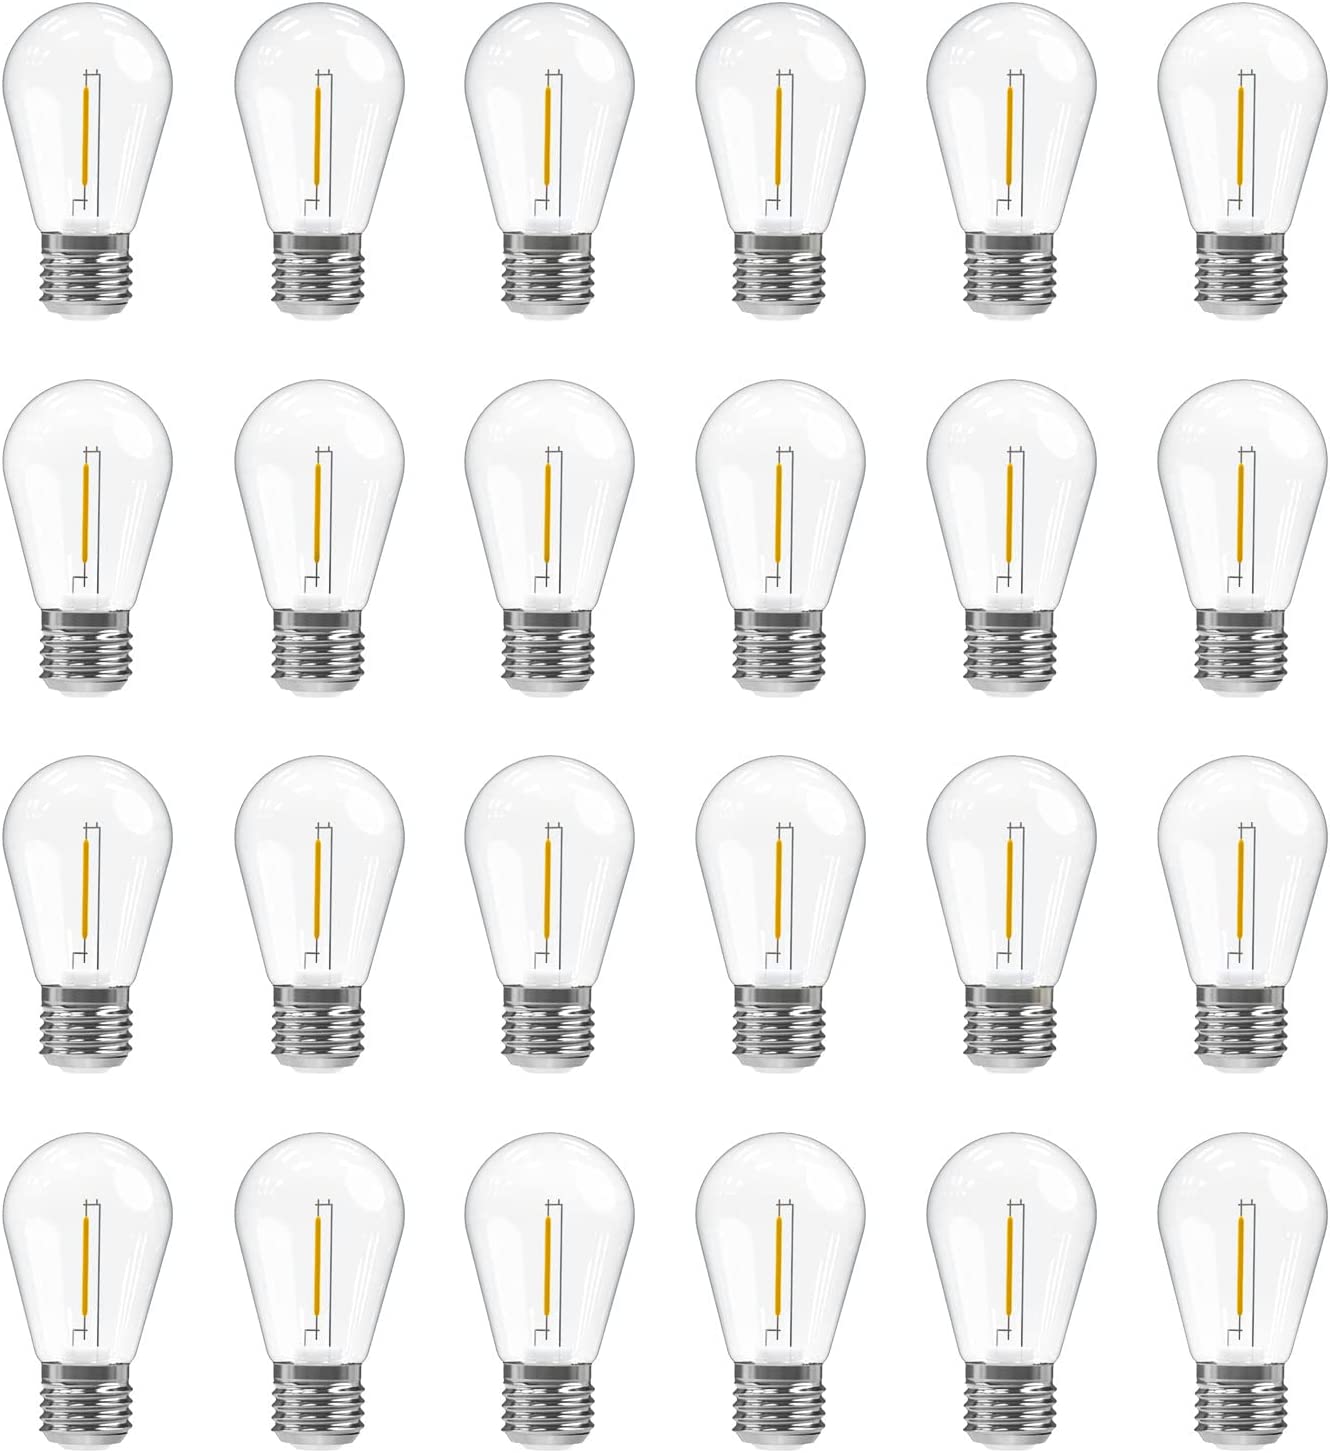 24-Count Romwish 1W Dimmable LED S14 Replacement Edison String Light Bulbs (Warm White, E26)  $13.20 + Free Shipping